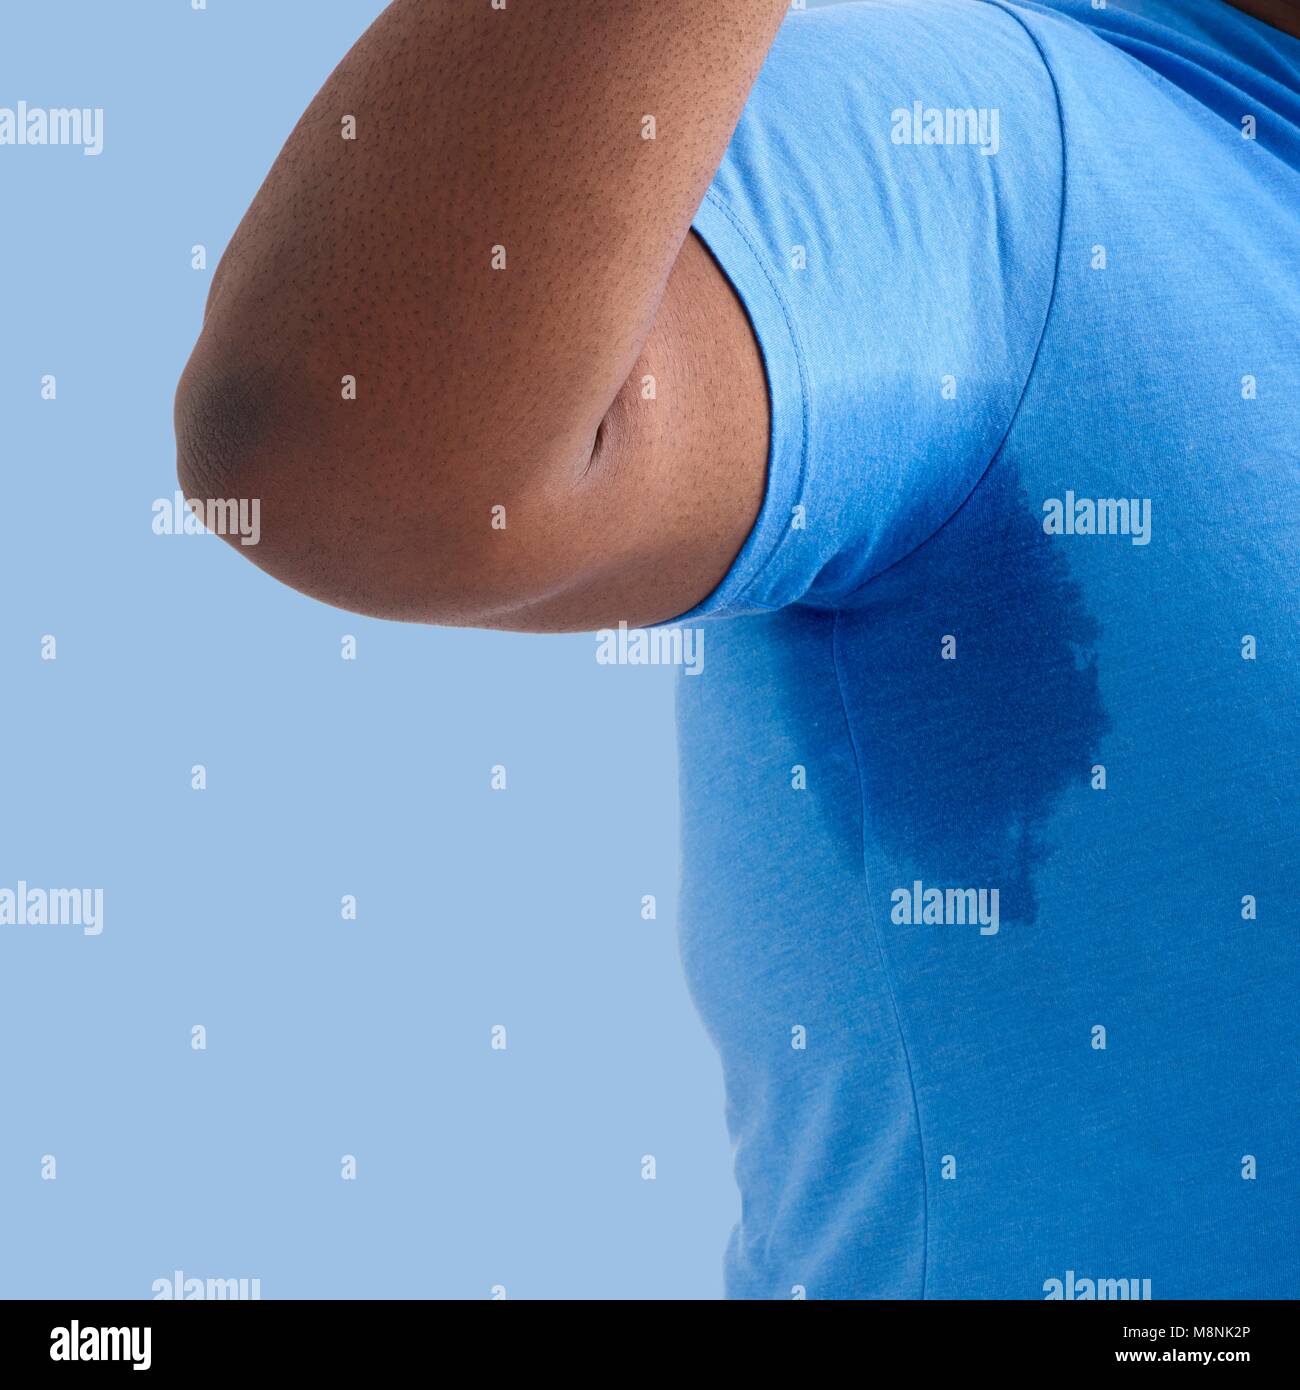 Overweight man with arm raised and sweat patch under arm. Stock Photo